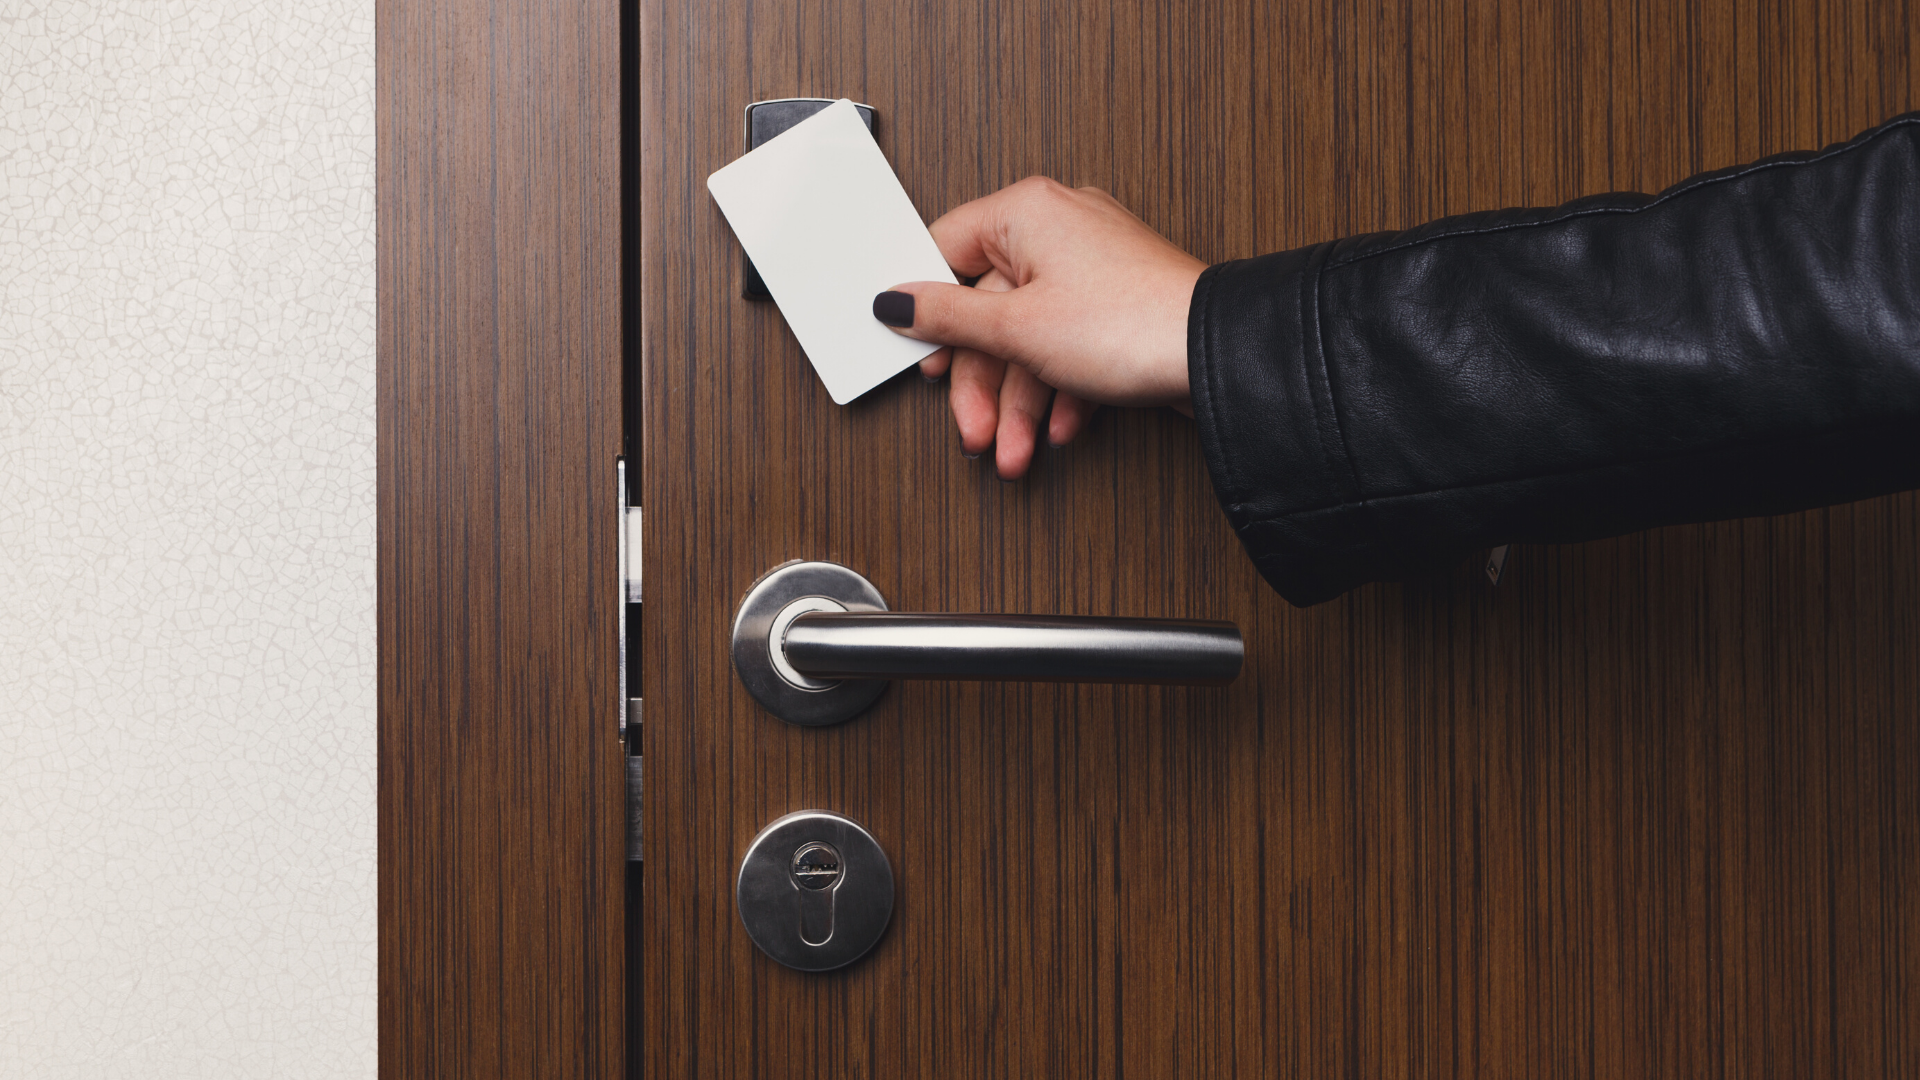 Employee Access with Smart Lock